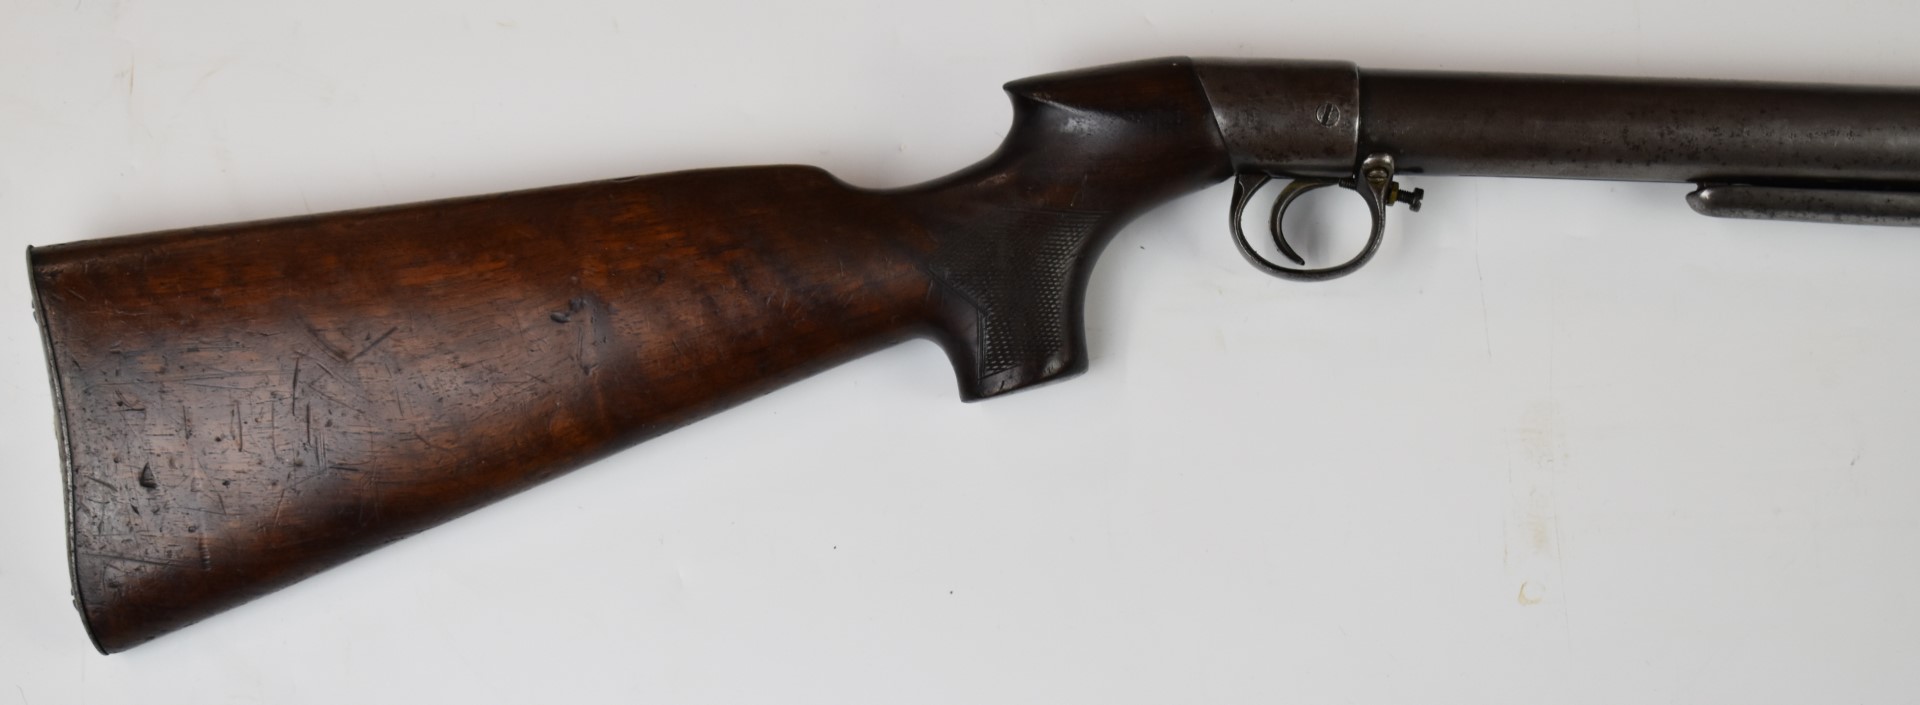 BSA .177 under-lever air rifle with chequered semi-pistol grip, adjustable trigger and sights and - Image 3 of 8